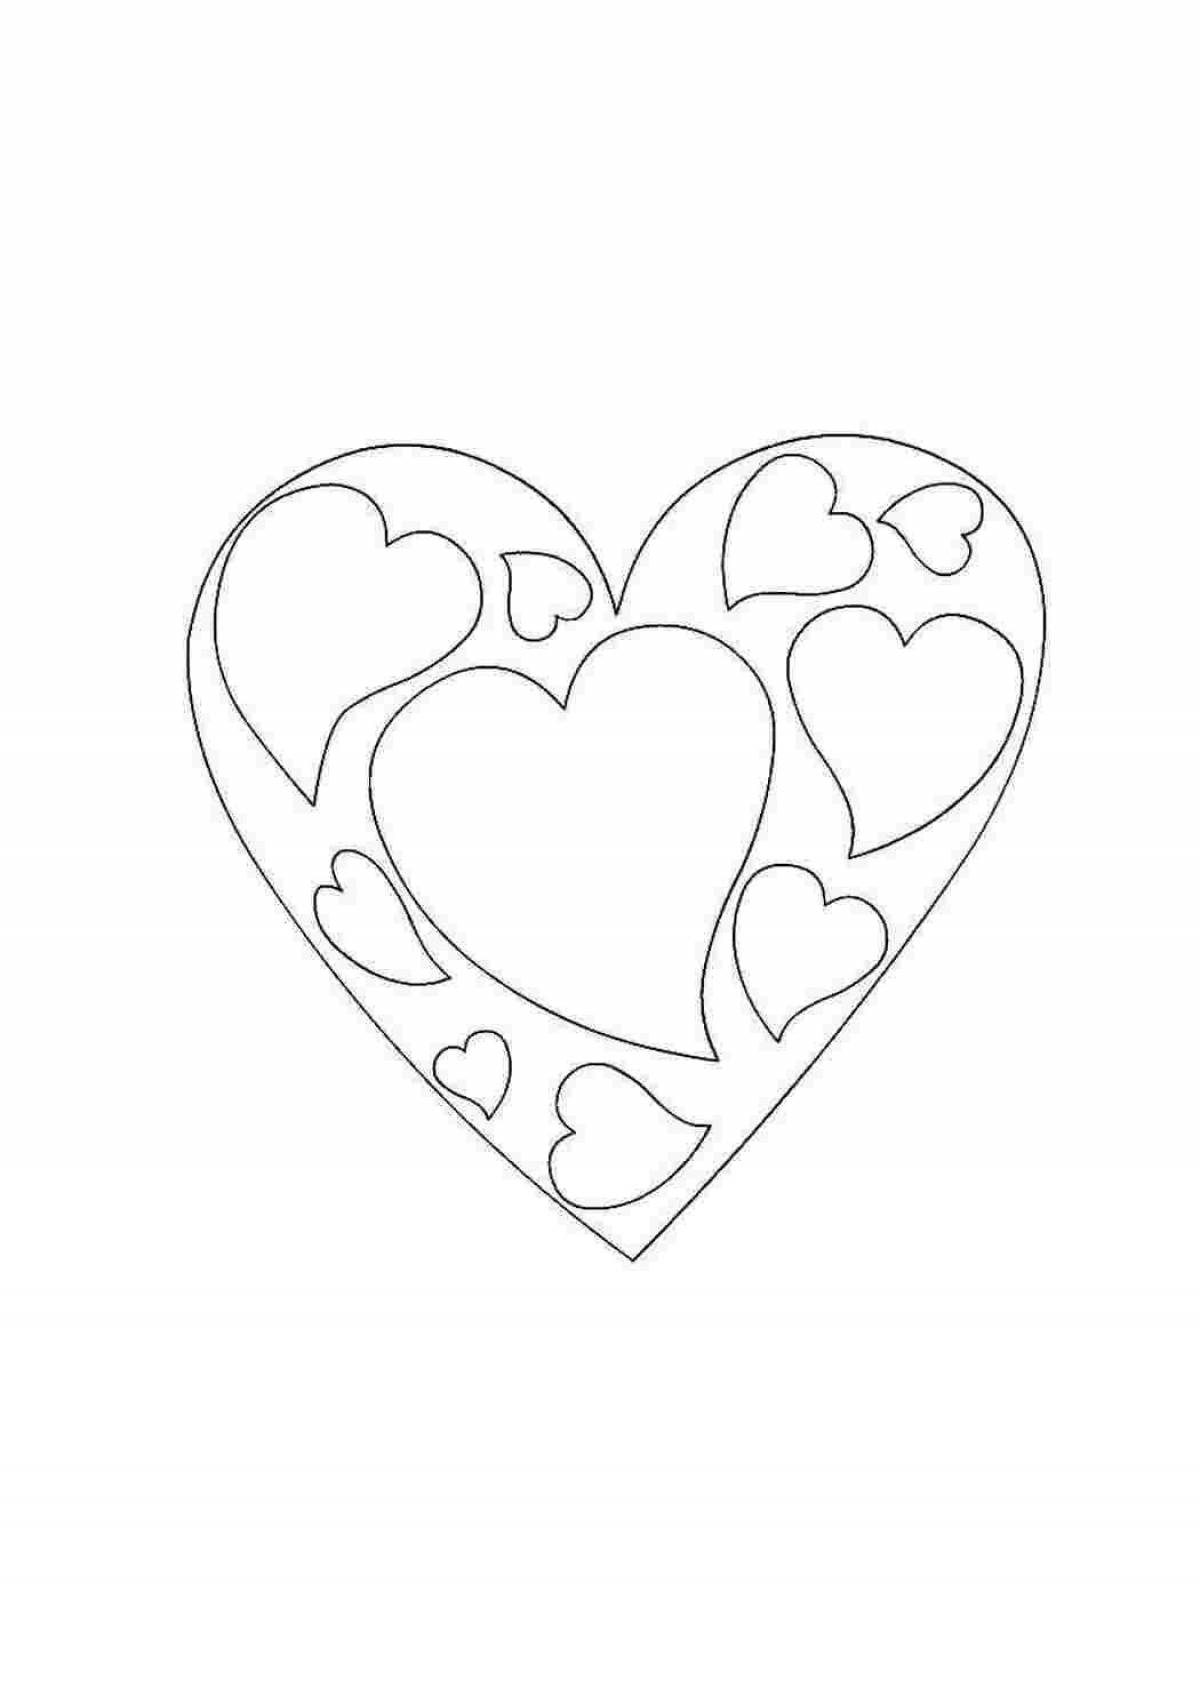 Coloring book joyful heart for children 3-4 years old